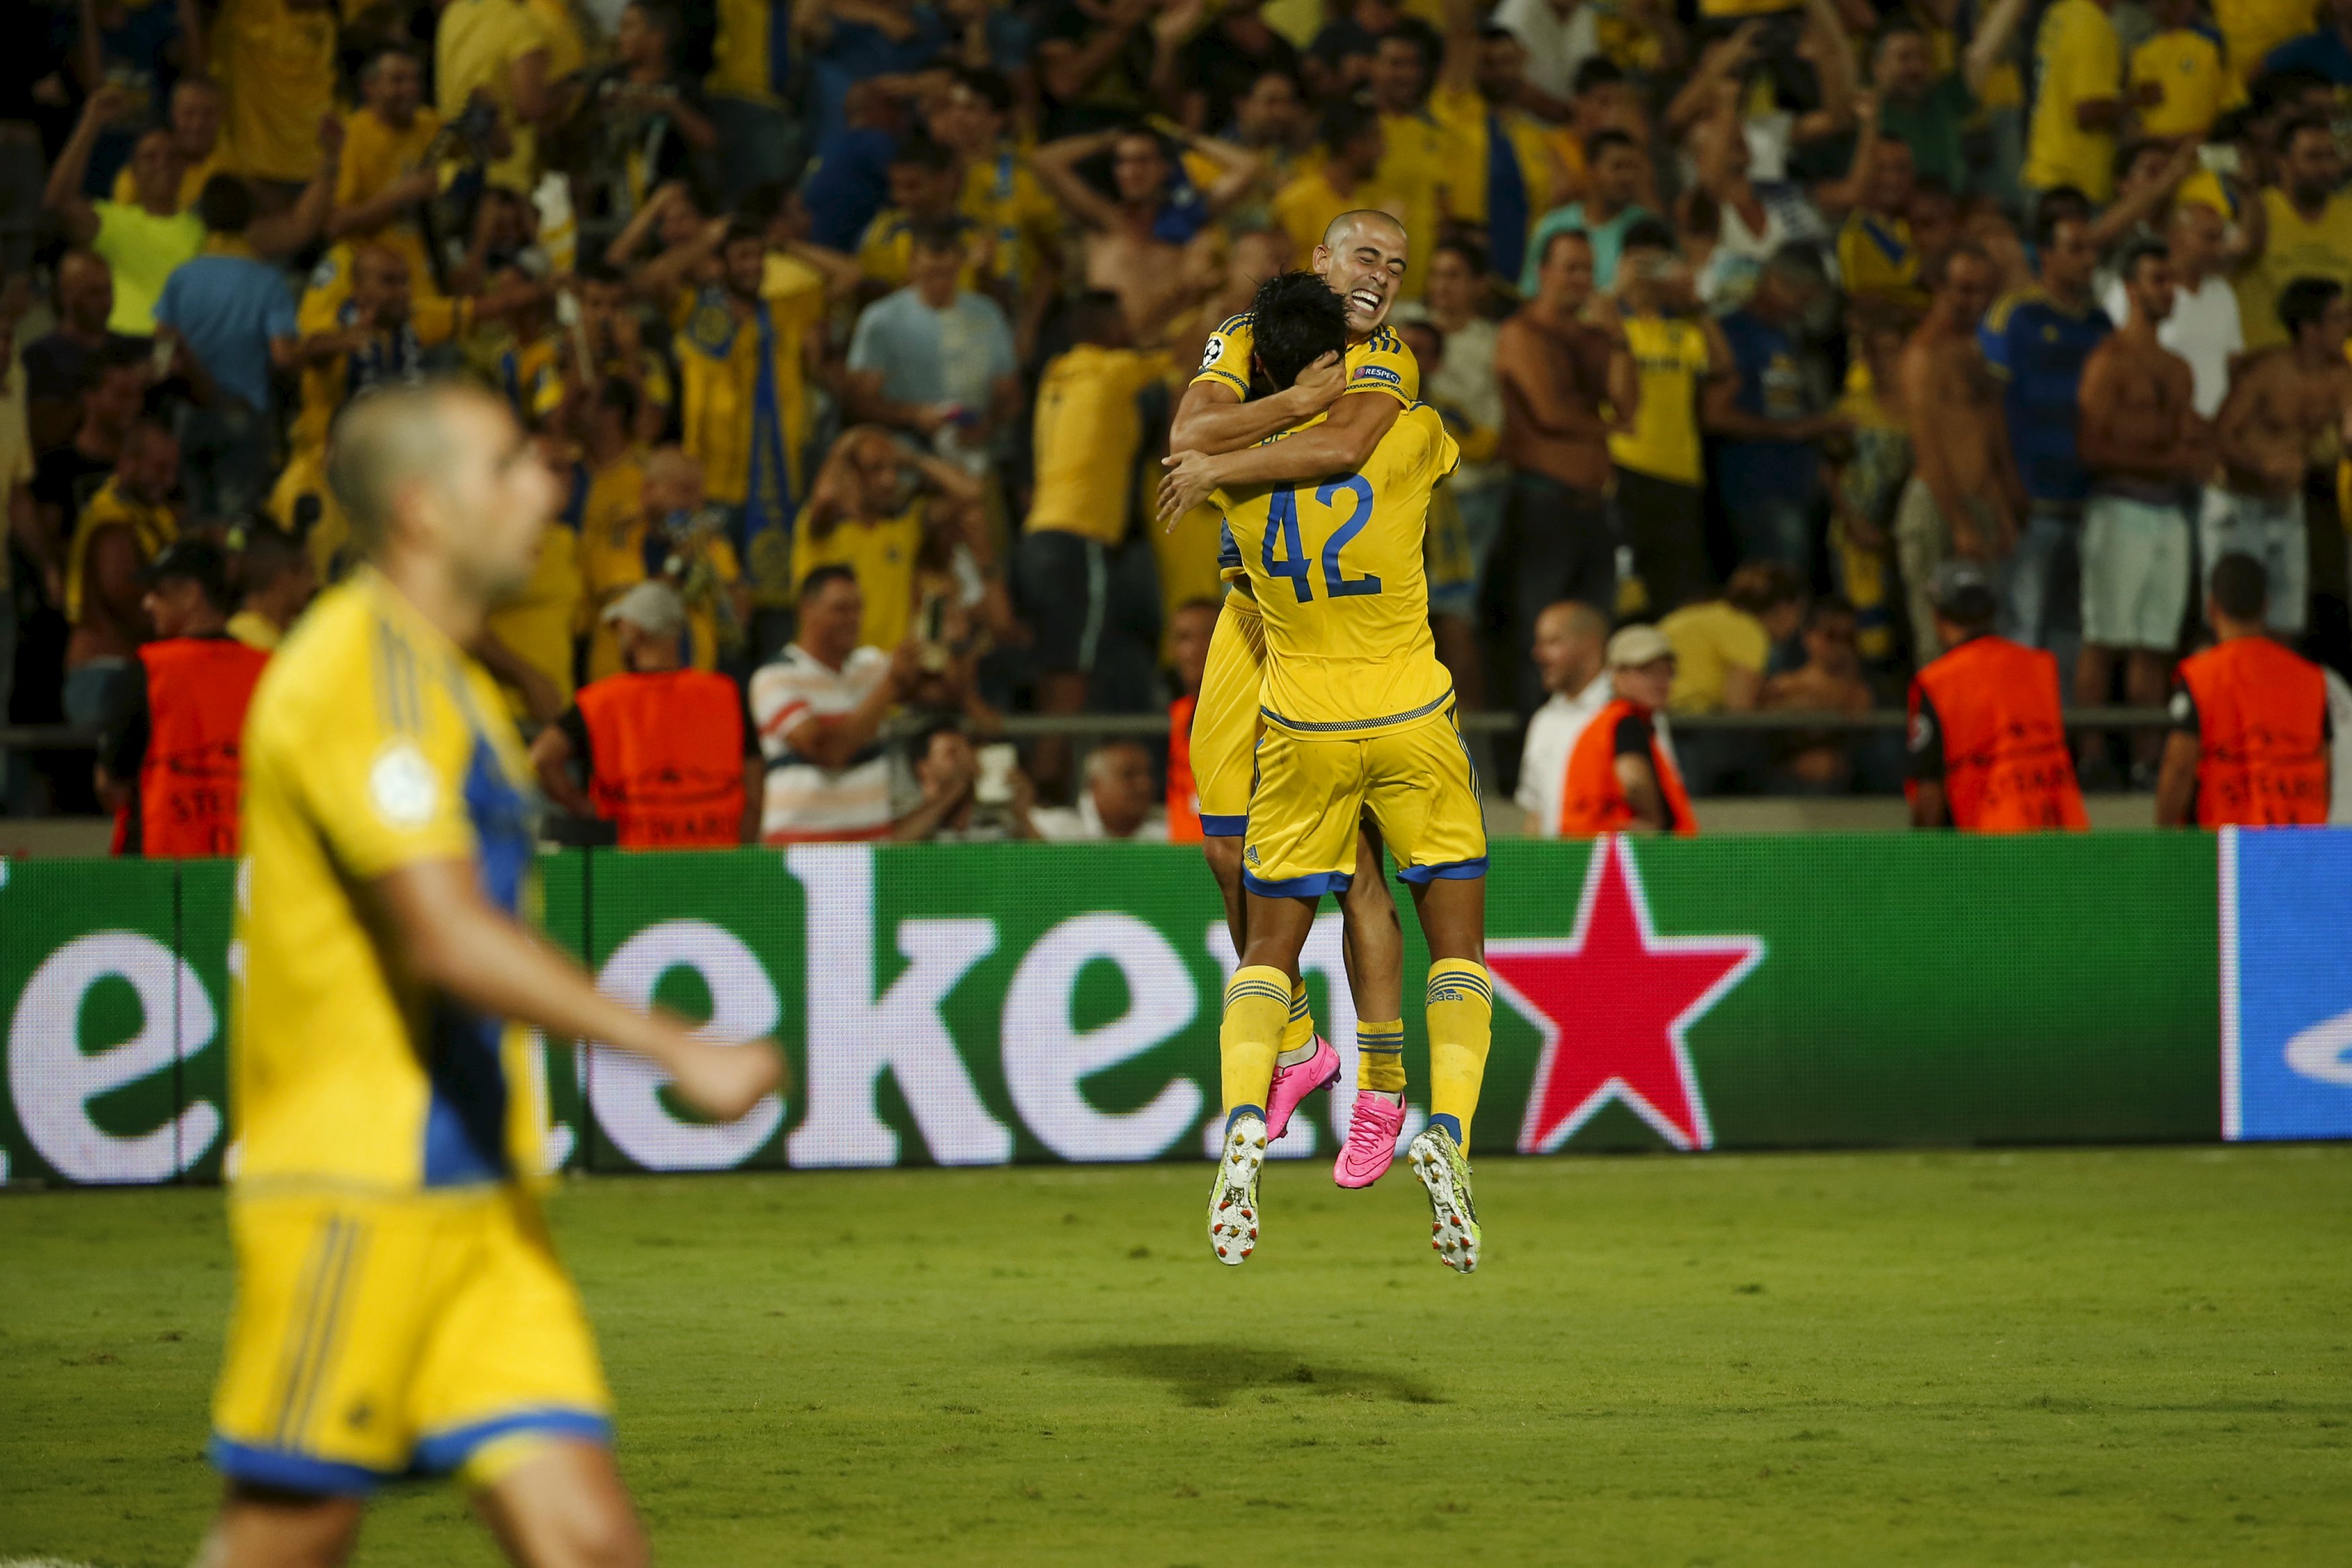 Maccabi Tel Aviv's Dor Peretz and Tal Ben Haim celebrate after advancing to the group stages of the Champions League following their soccer match against Basel at the Bloomfield stadium in Tel Aviv August 25, 2015. REUTERS/Baz Ratner